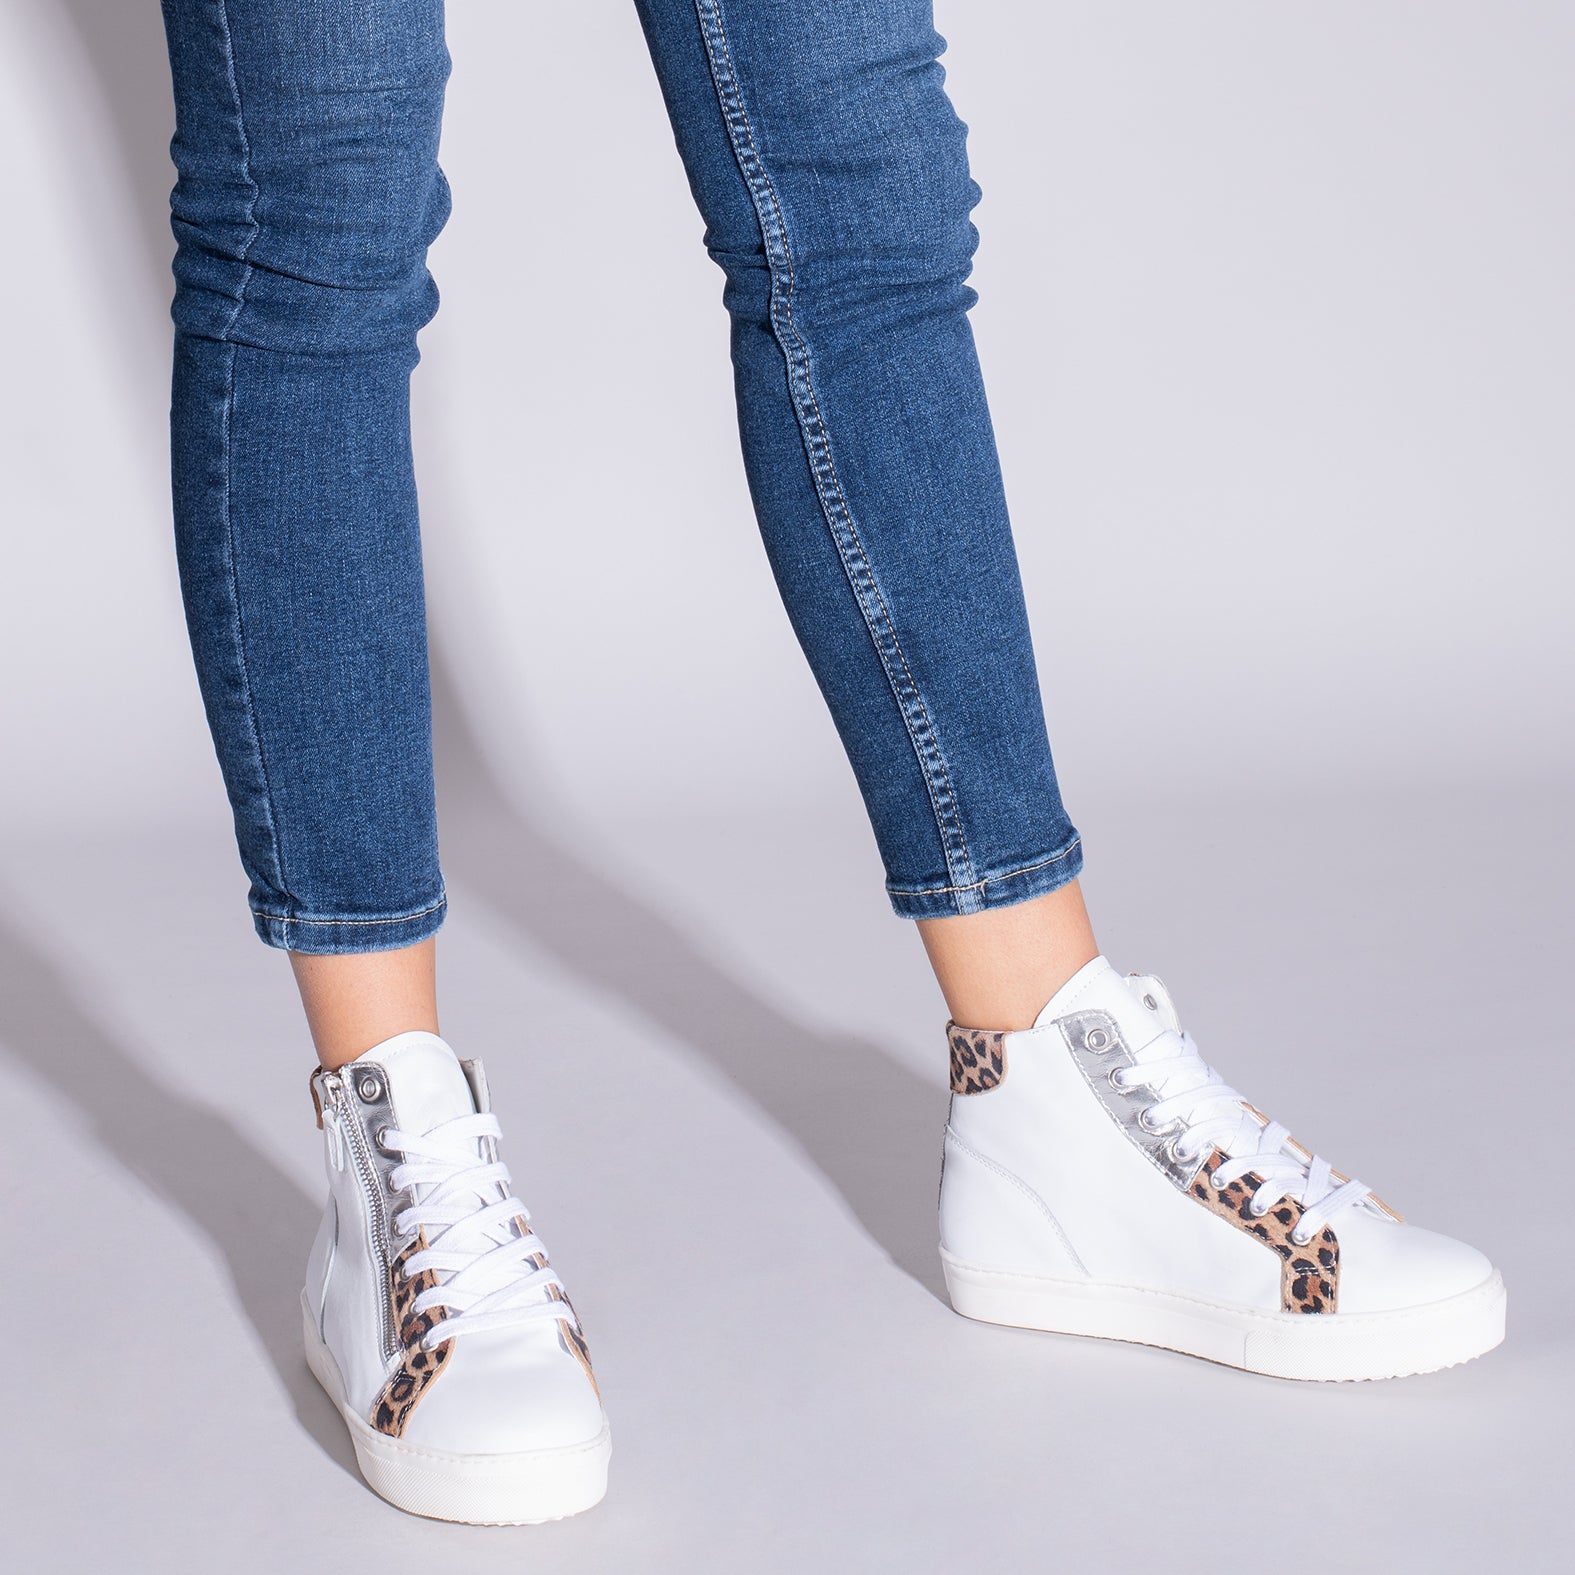 STAR - WHITE sneakers with platform